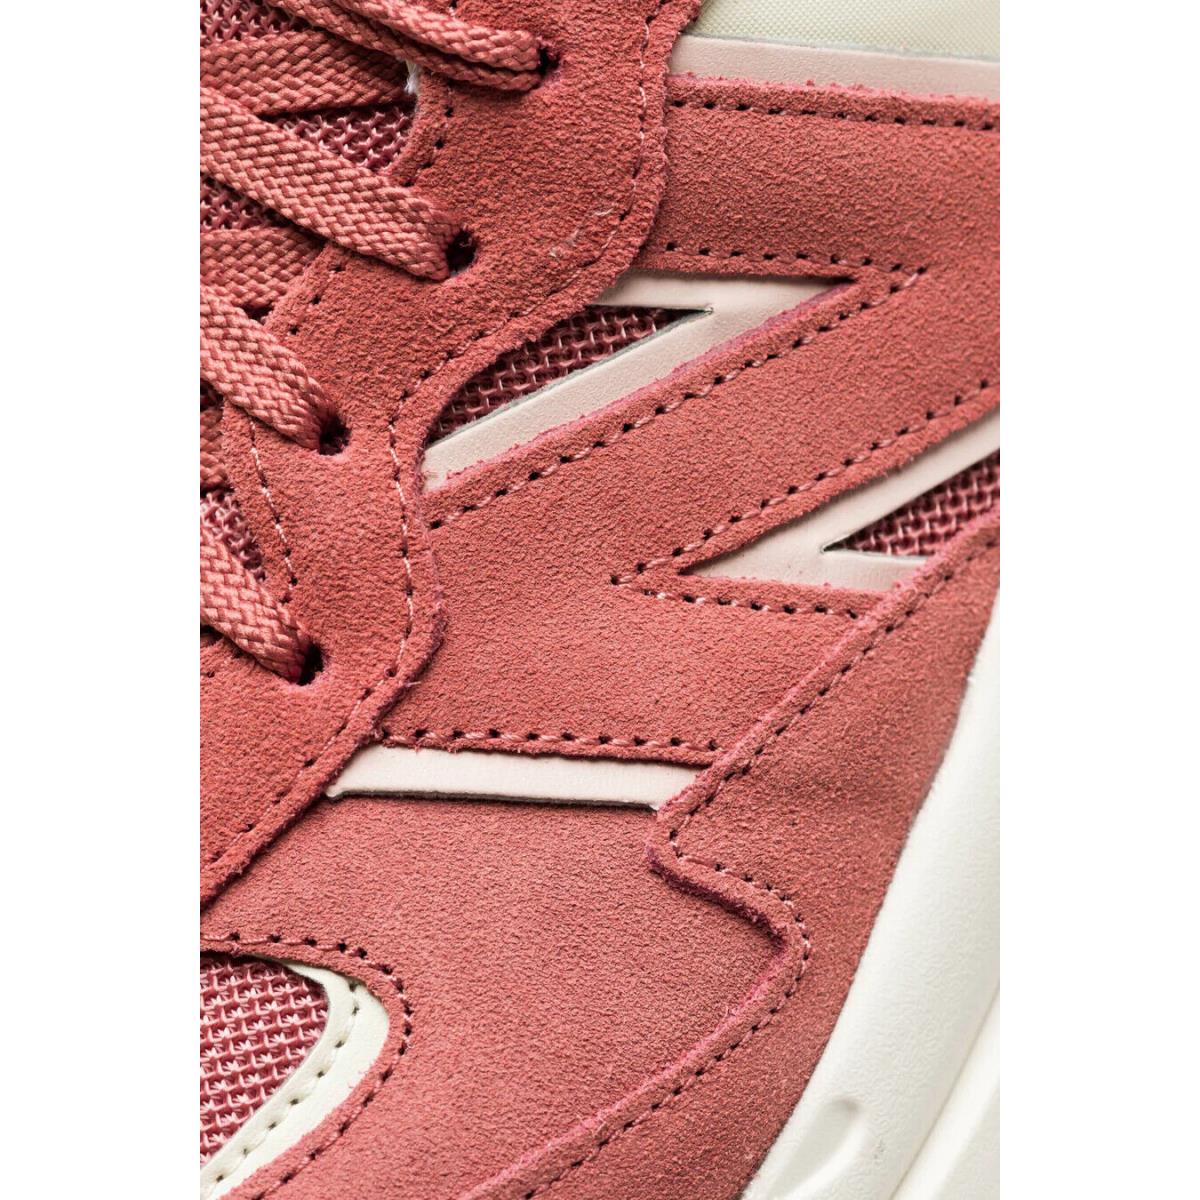 New Balance shoes  - Henna/Oyster Pink 6